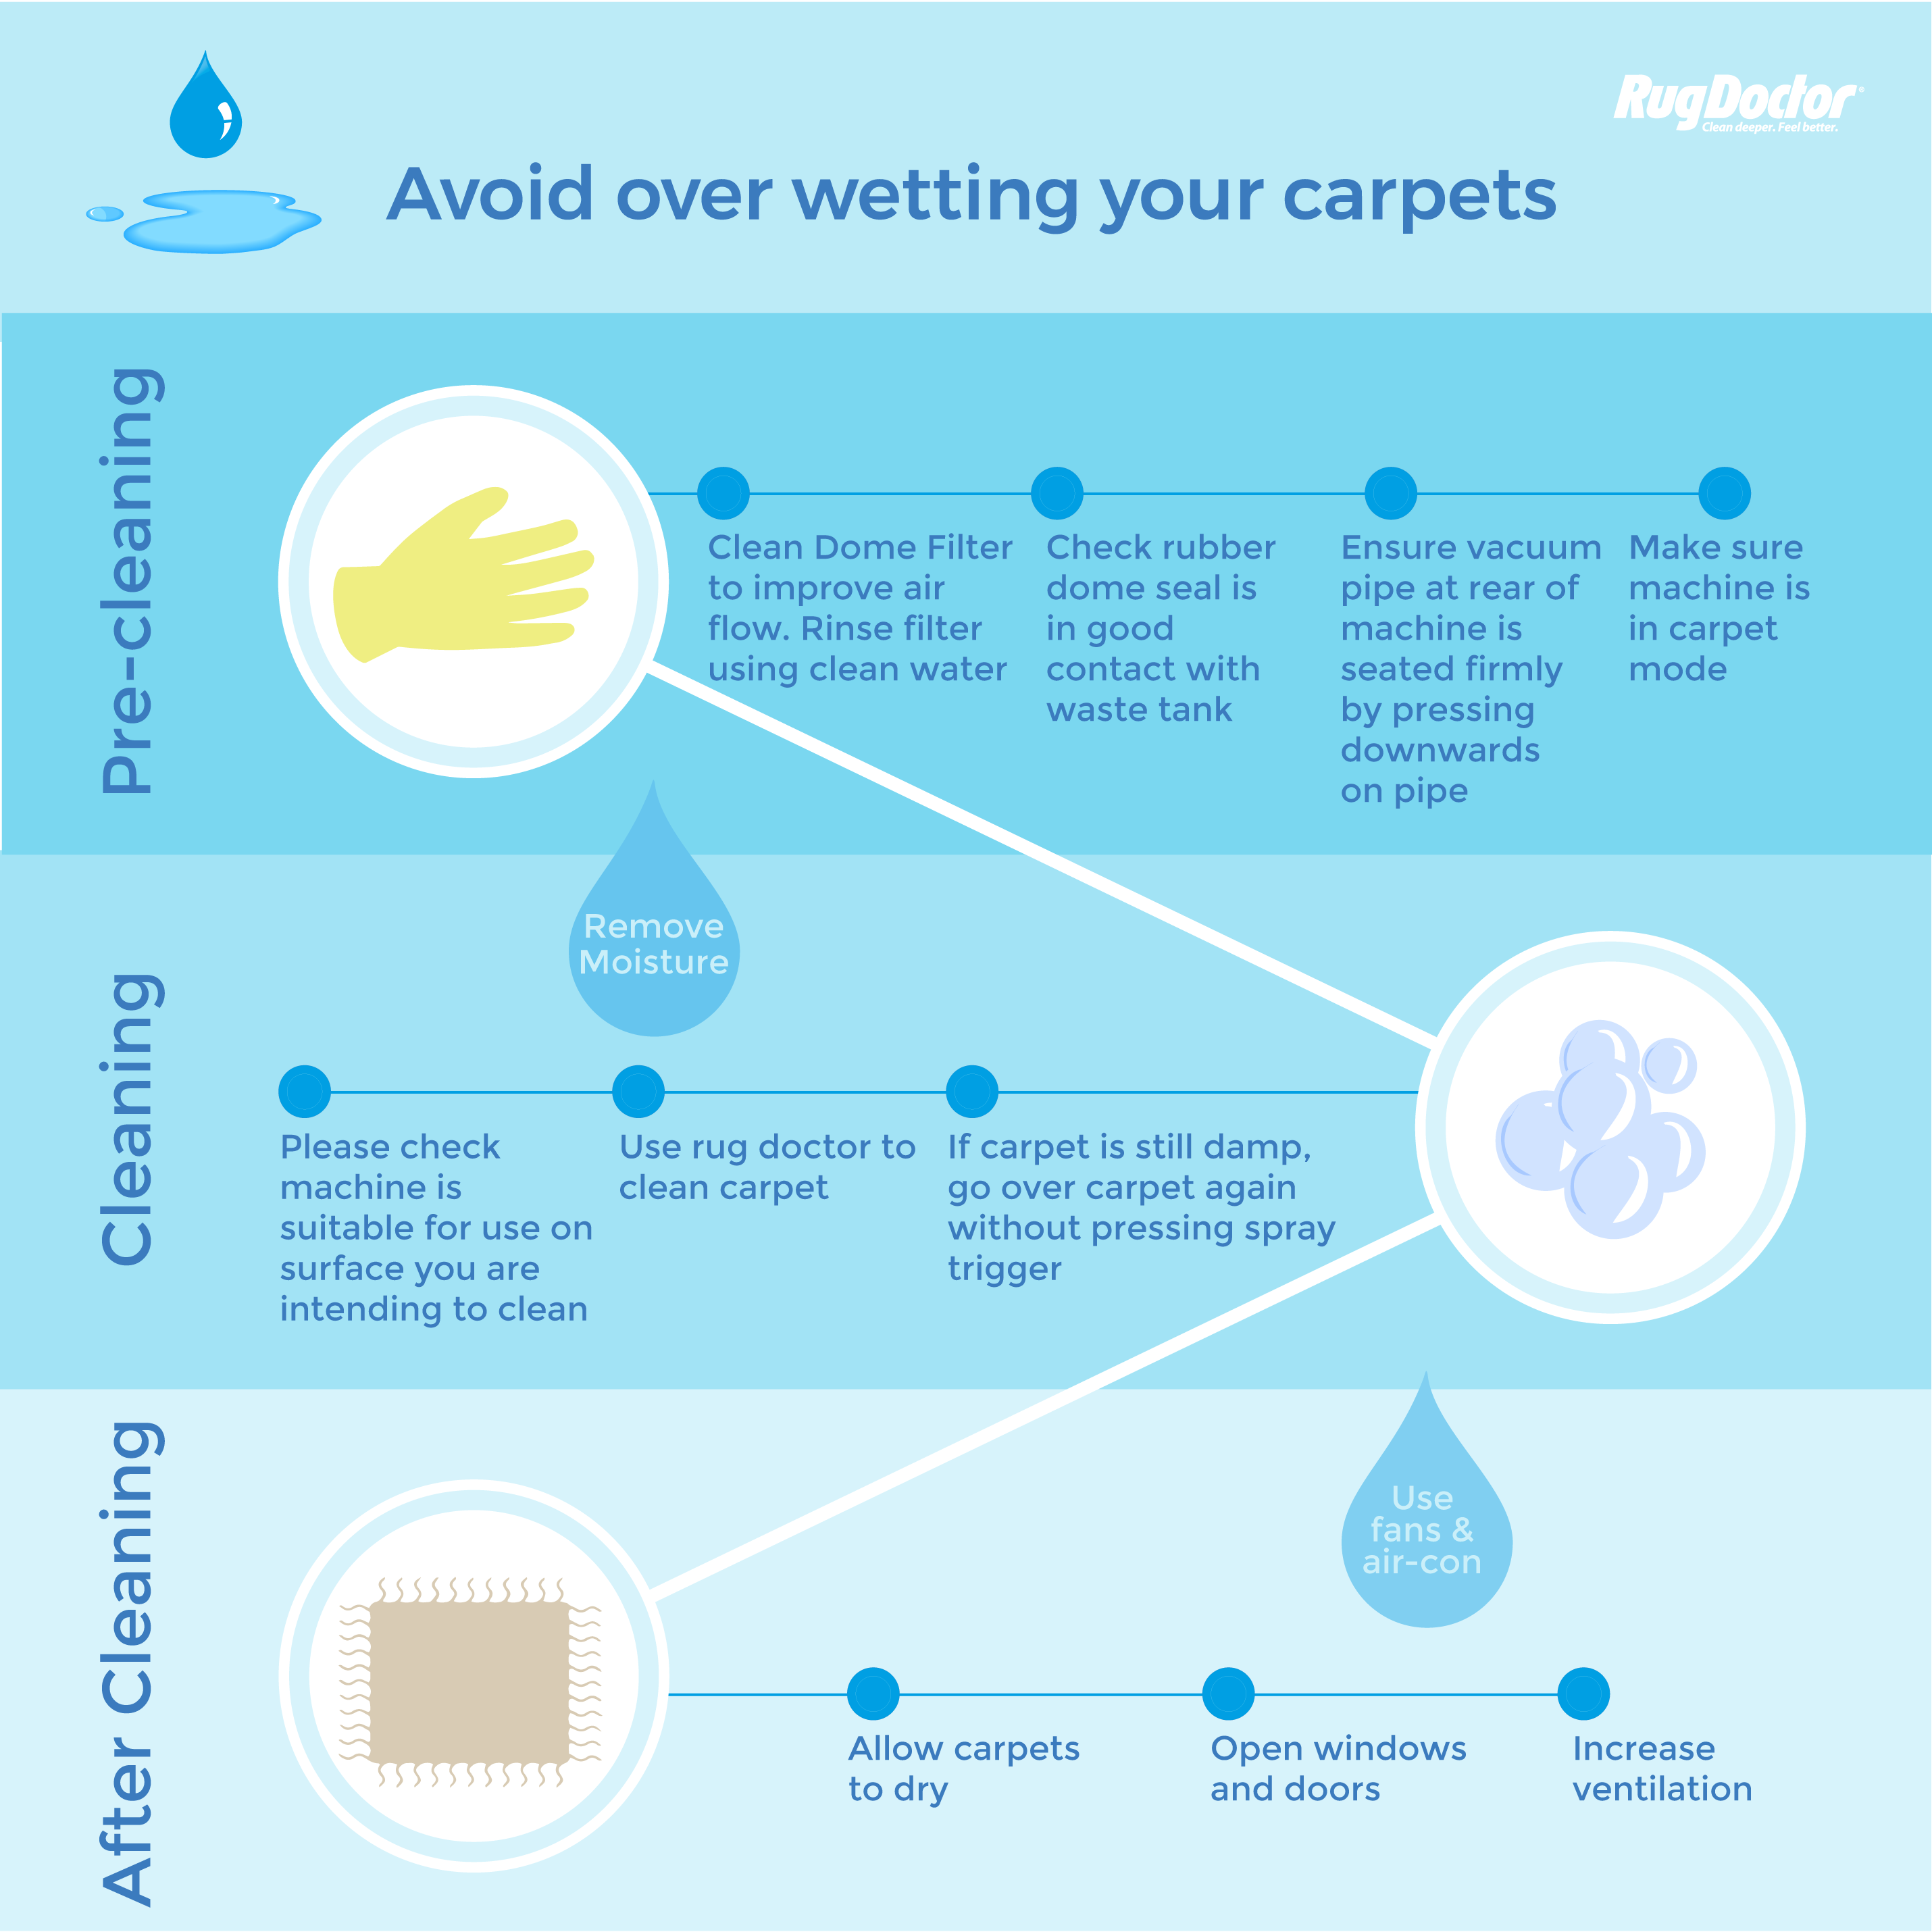 What to Do if Your Rug Gets Wet